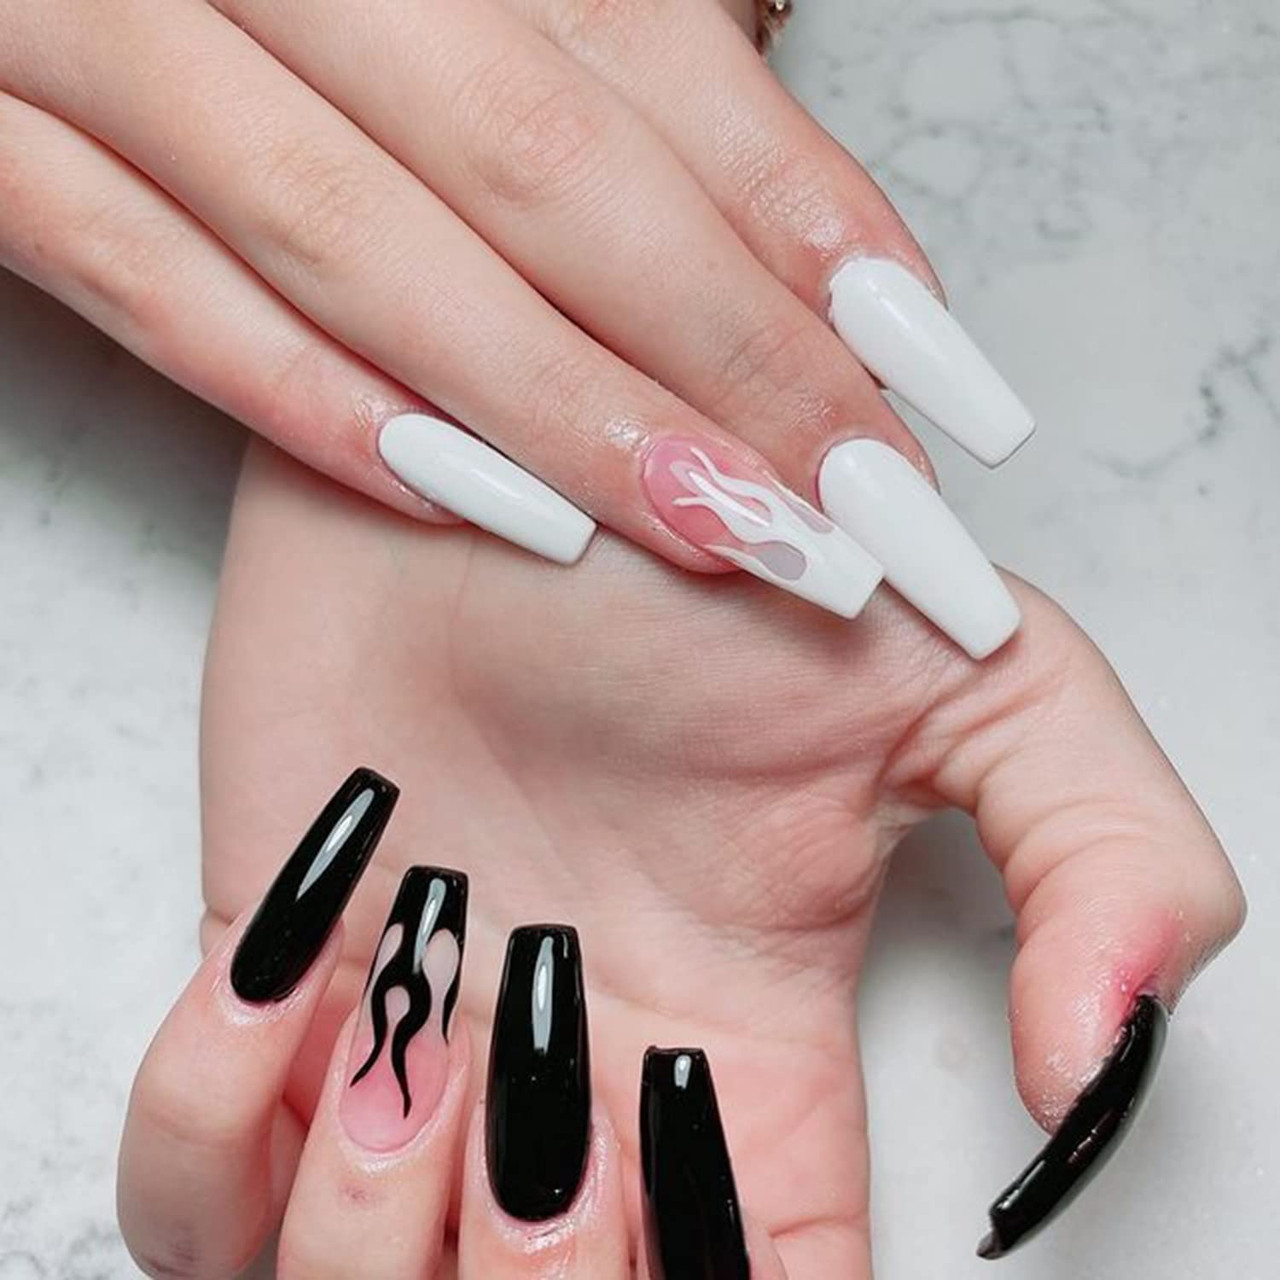 Easy Nail Art | Black and White Nail Designs without tools - YouTube